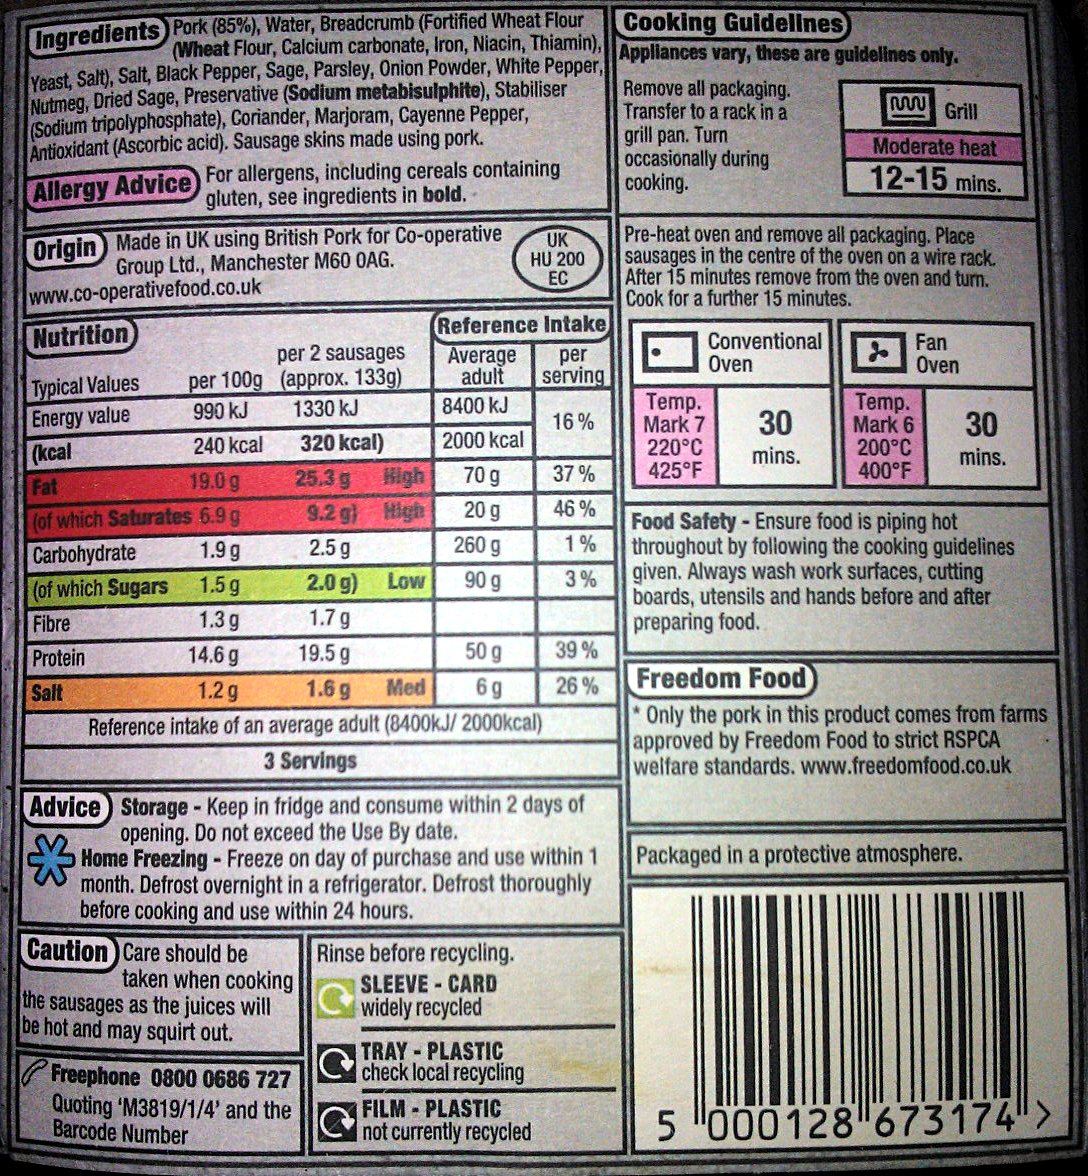 File:Food label from the Co-operative Food Sausages.jpg - Wikimedia Commons